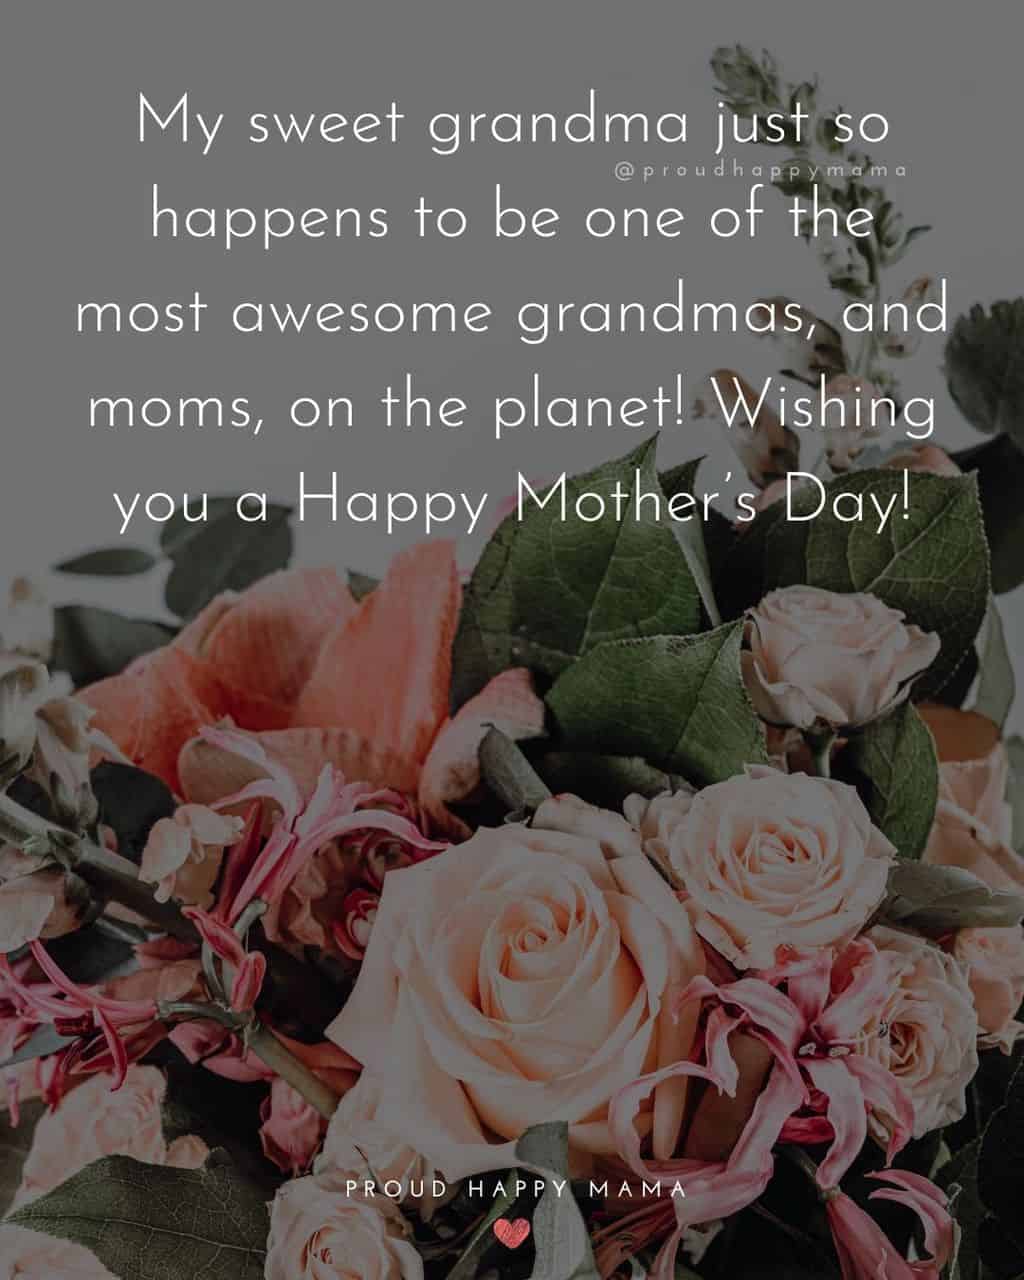 Happy Mothers Day Quotes To Grandma - My sweet grandma just so happens to be one of the most awesome grandmas, and